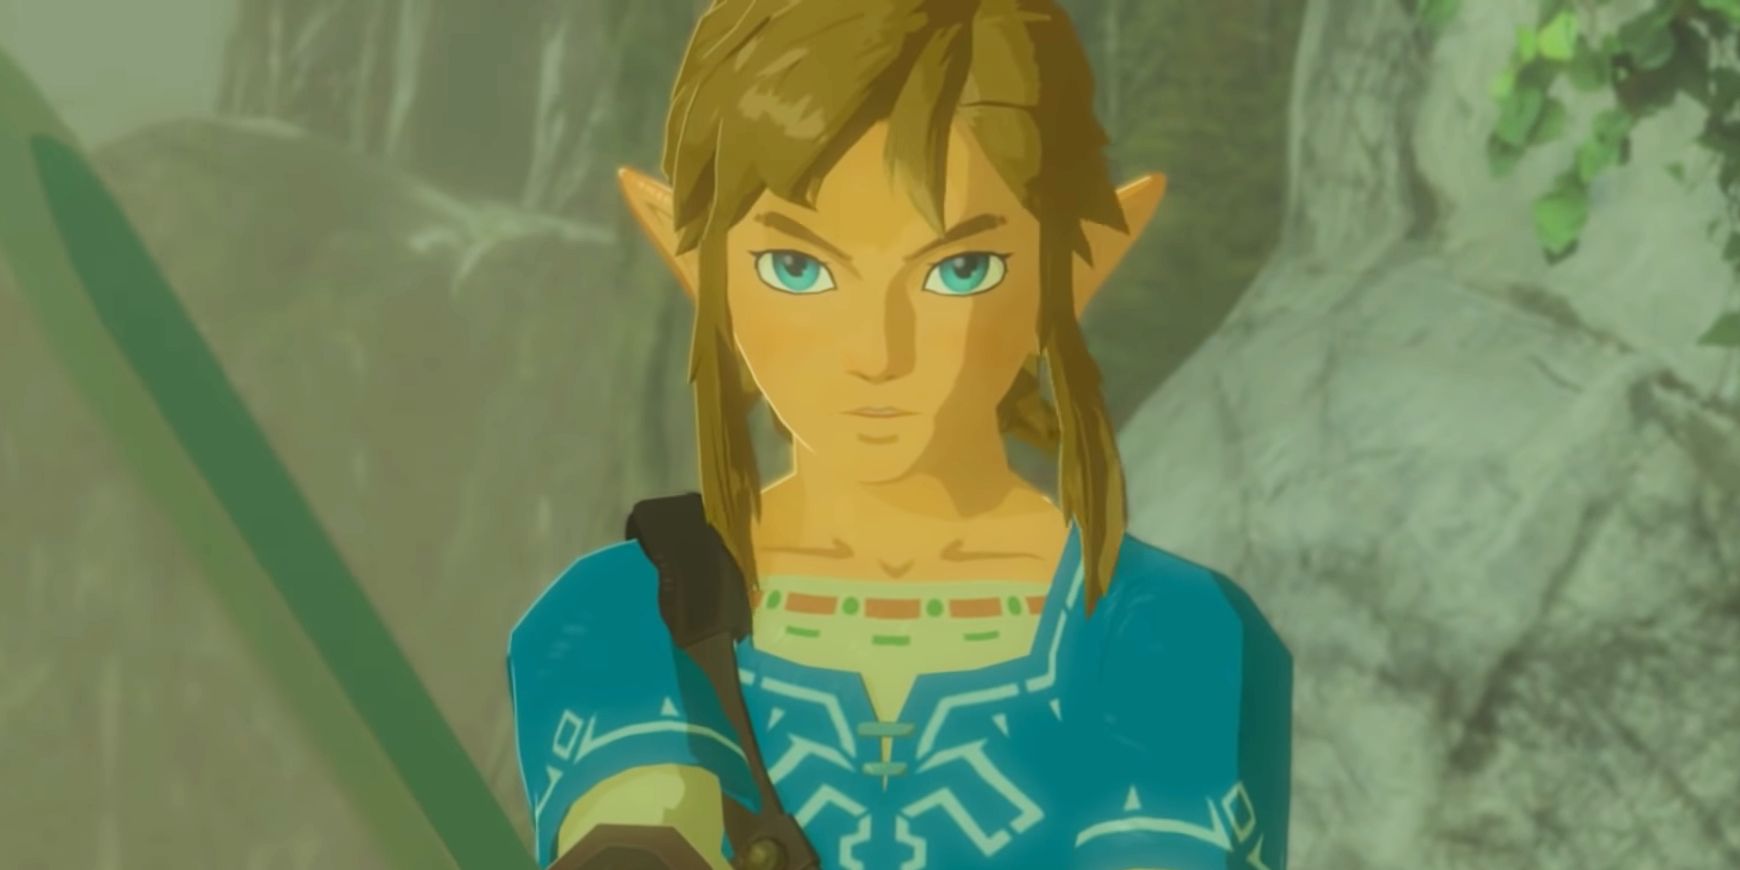 Breath Of The Wild 2 Why Link Should Stay Silent In The Switch Legend Of Zelda Sequel